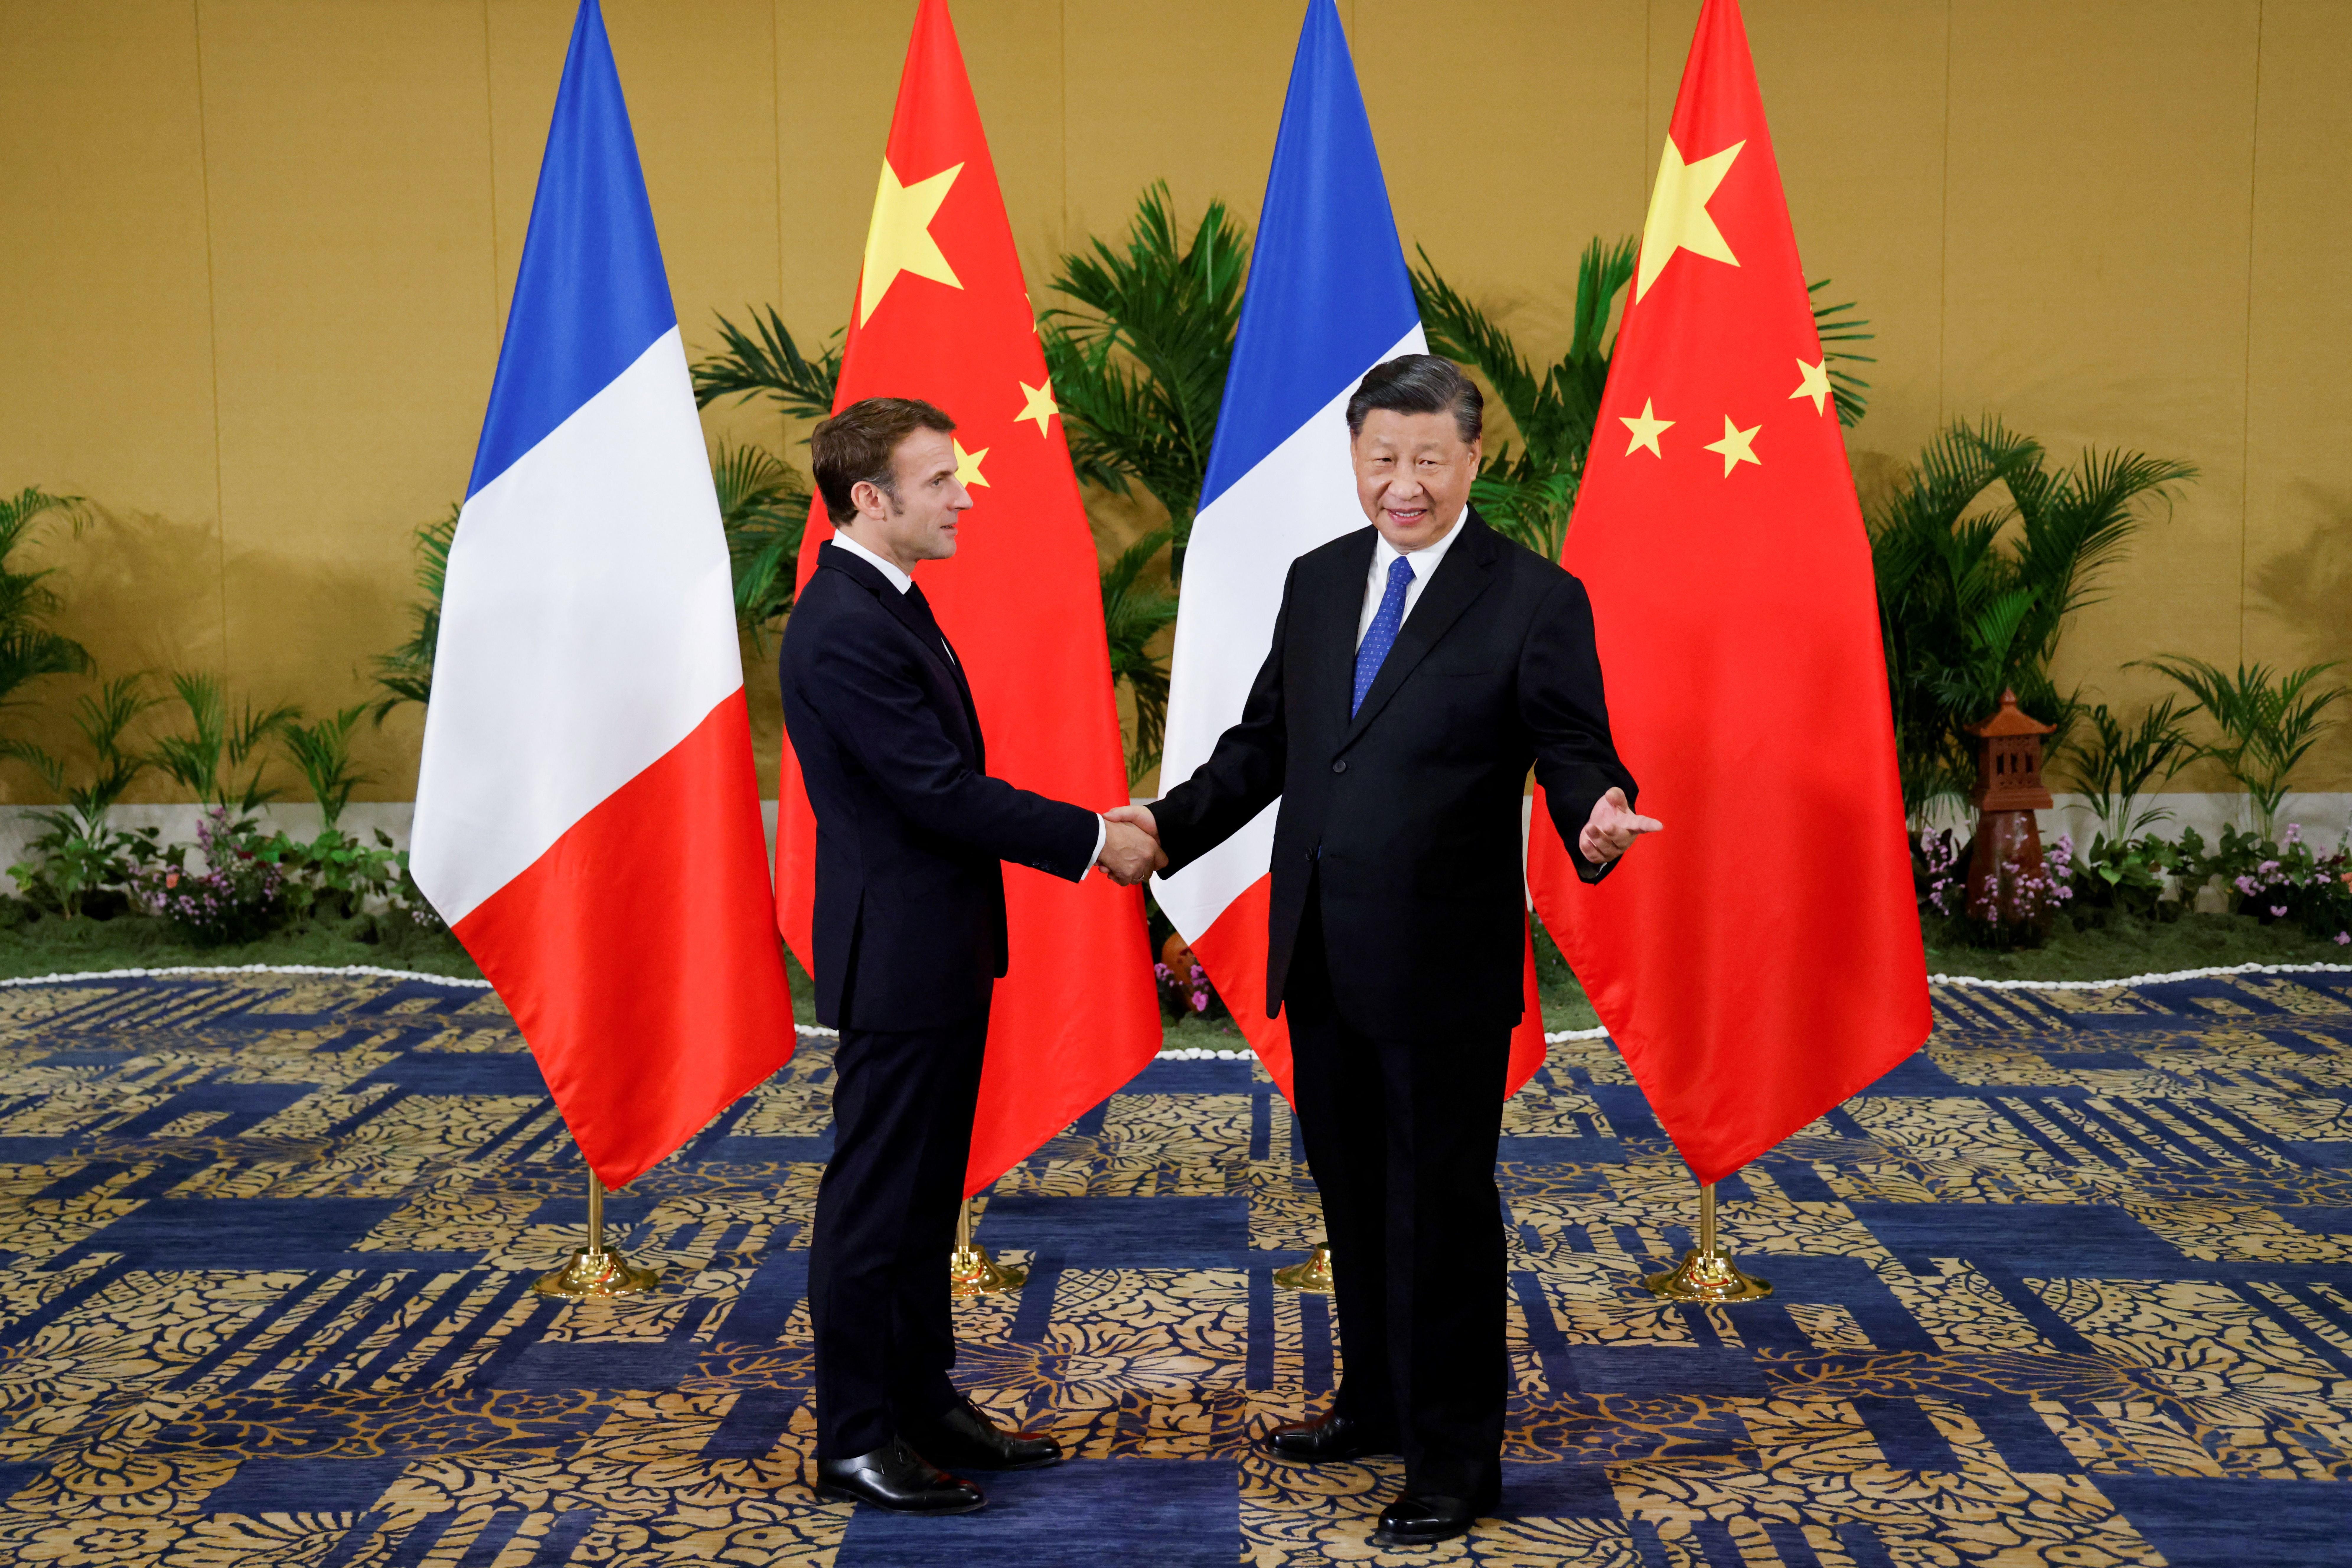 French President Emmanuel Macron (L) meets with Chinese President Xi Jinping on the sidelines of the G20 Summit in Bali. Ludovic Marin/ Pool/ AFP